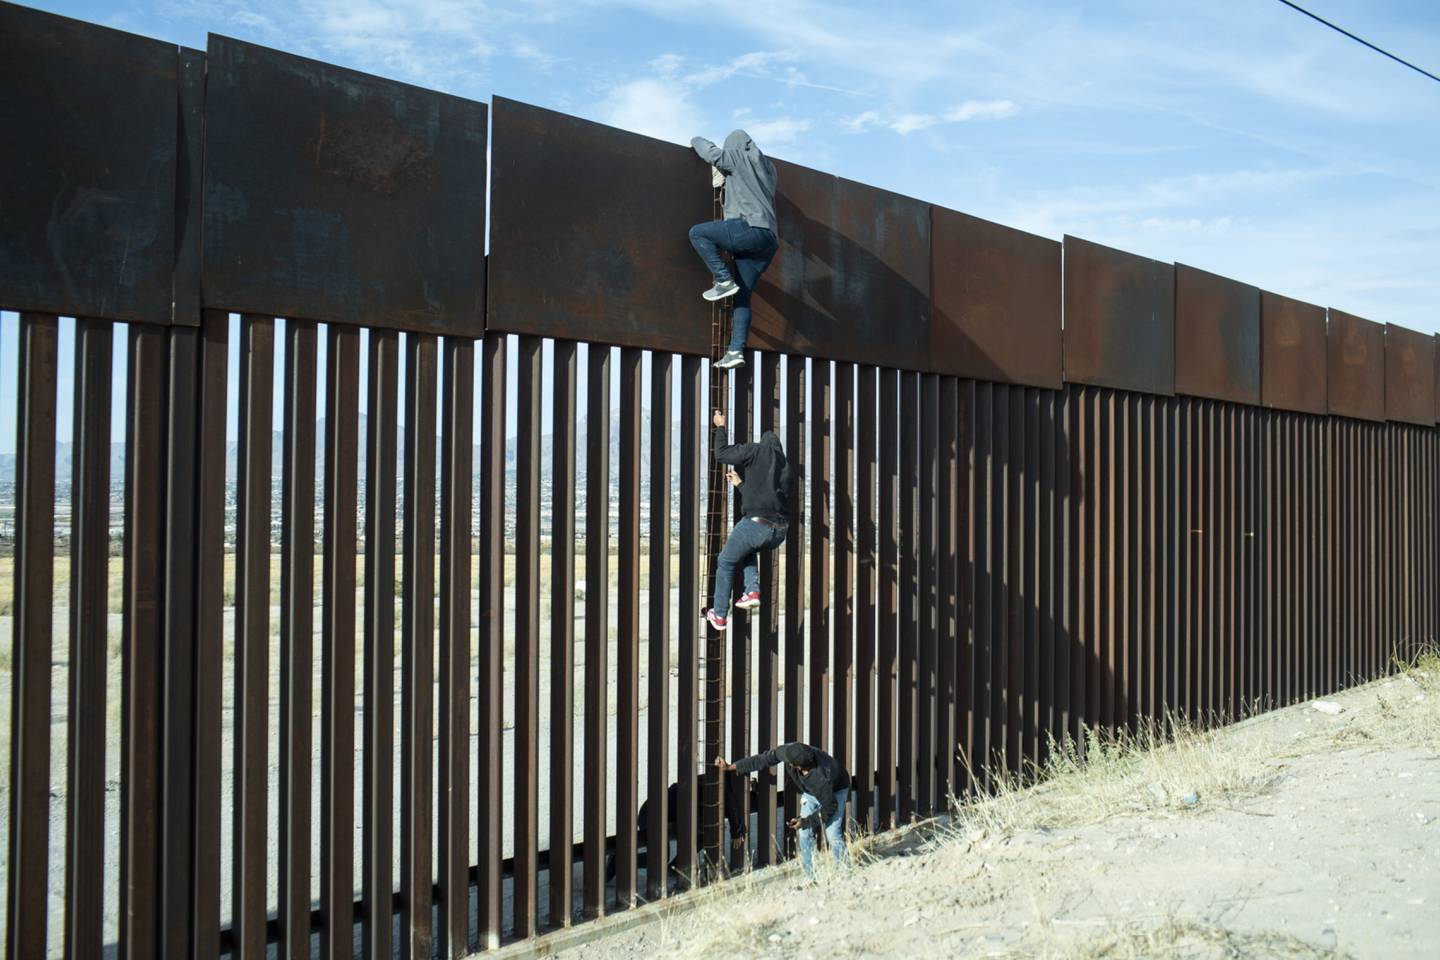 Migrants trying to jump over the border wall erected along Ciudad Juarez, Mexico.